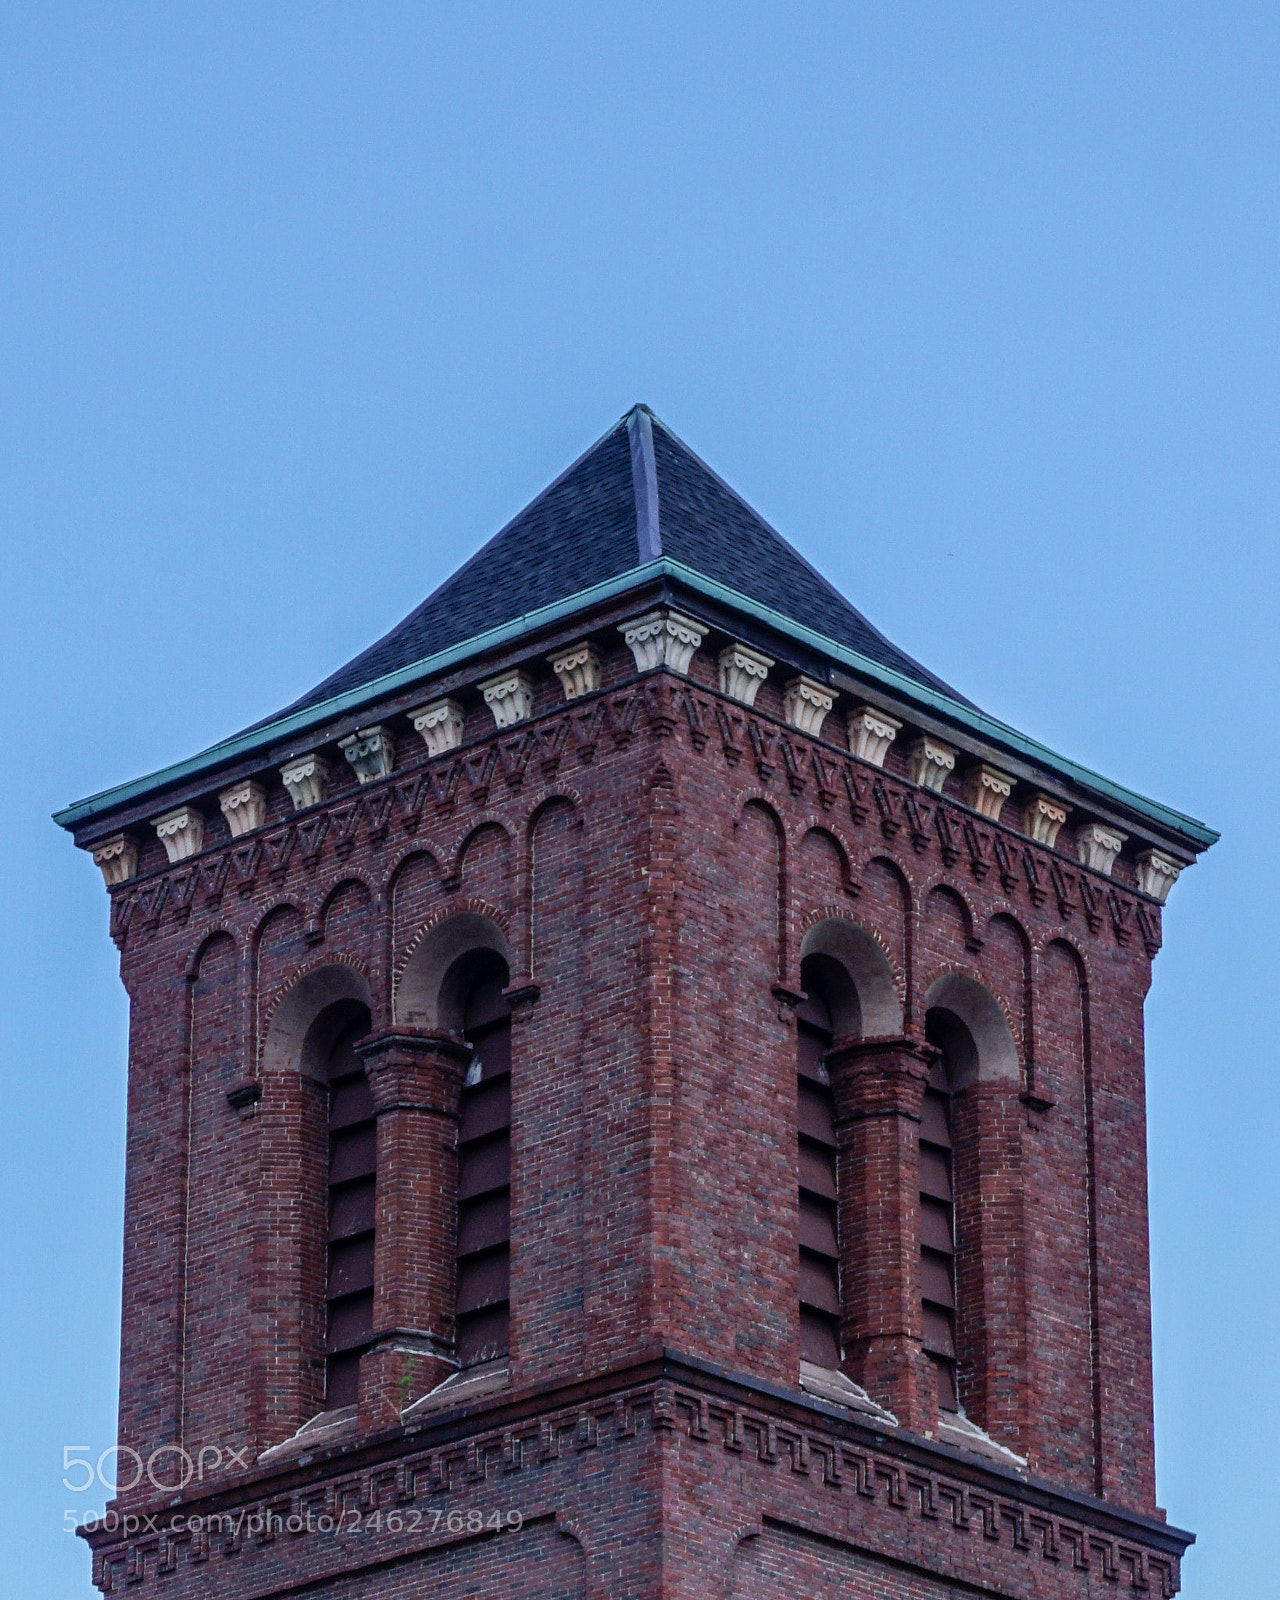 Sony a6000 sample photo. Symmetric tower top photography